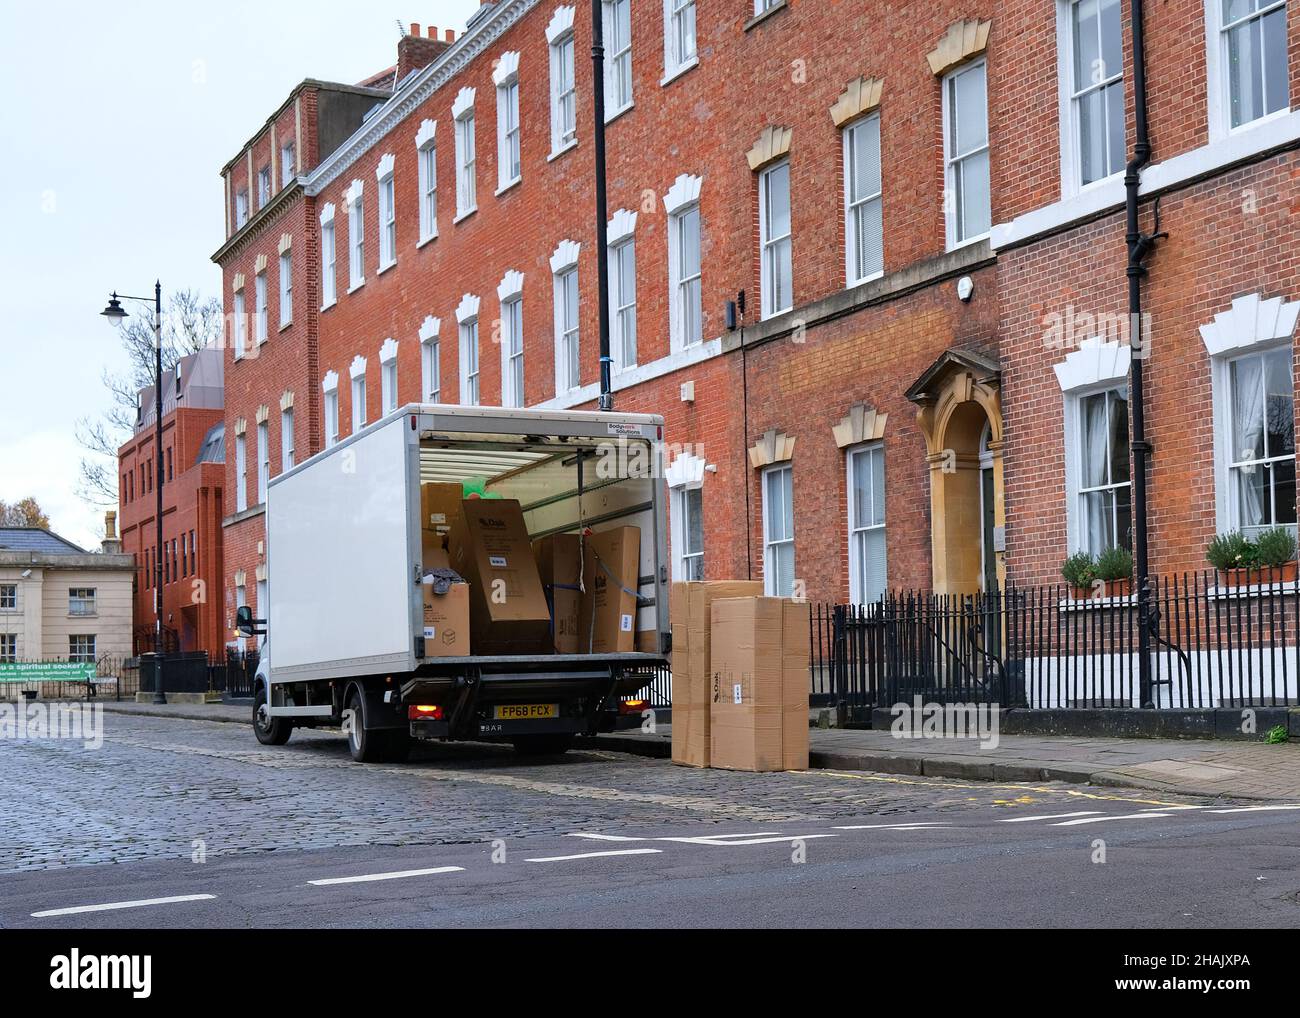 December 2021 - Medium sized van truck delivering large boxes to   an office in Brunswick Square, Bristol, England, UK., Stock Photo